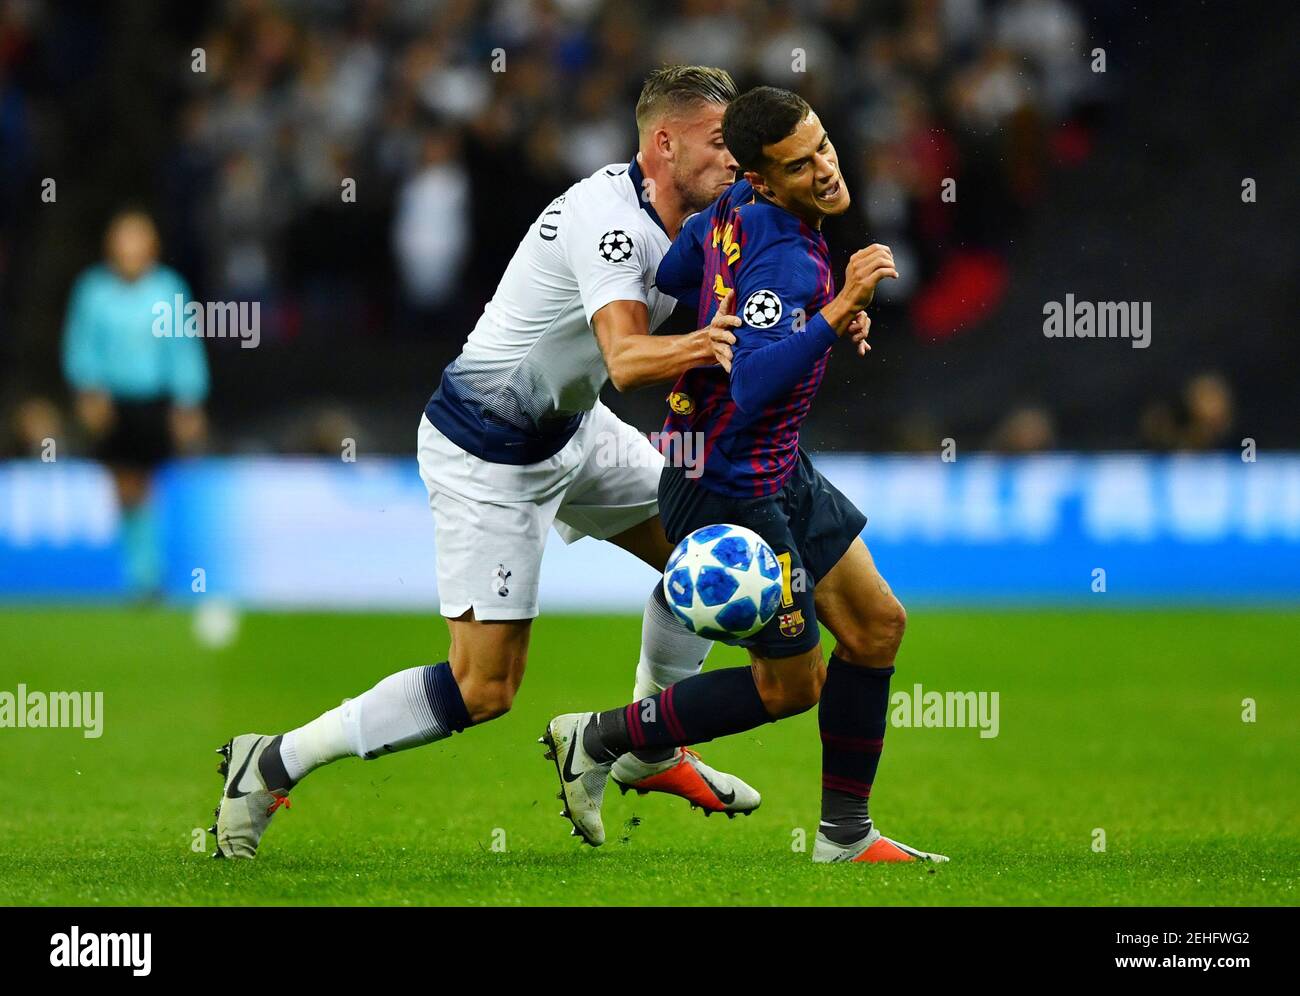 Soccer Football - Champions League - Group Stage - Group B - Tottenham Hotspur v FC Barcelona - Wembley Stadium, London, Britain - October 3, 2018  Tottenham's Toby Alderweireld in action with Barcelona's Philippe Coutinho   REUTERS/Dylan Martinez Stock Photo